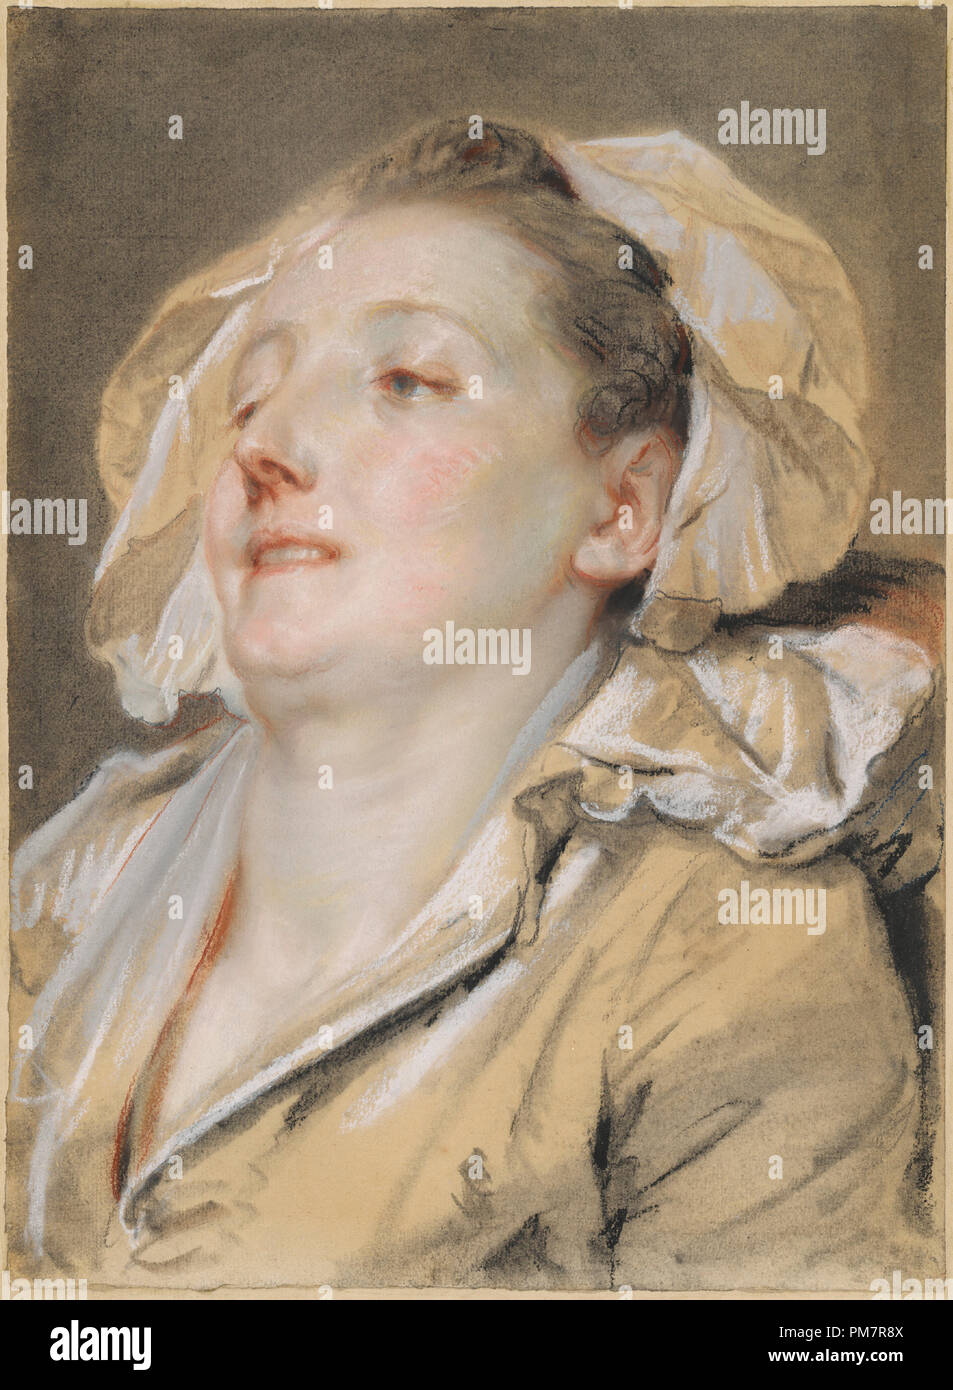 The Well-Loved Mother. Dated: 1765. Dimensions: overall: 44 x 32.2 cm (17 5/16 x 12 11/16 in.). Medium: pastel with red, black, and white chalks and stumping on light golden-brown laid paper. Museum: National Gallery of Art, Washington DC. Author: Jean-Baptiste Greuze. Stock Photo